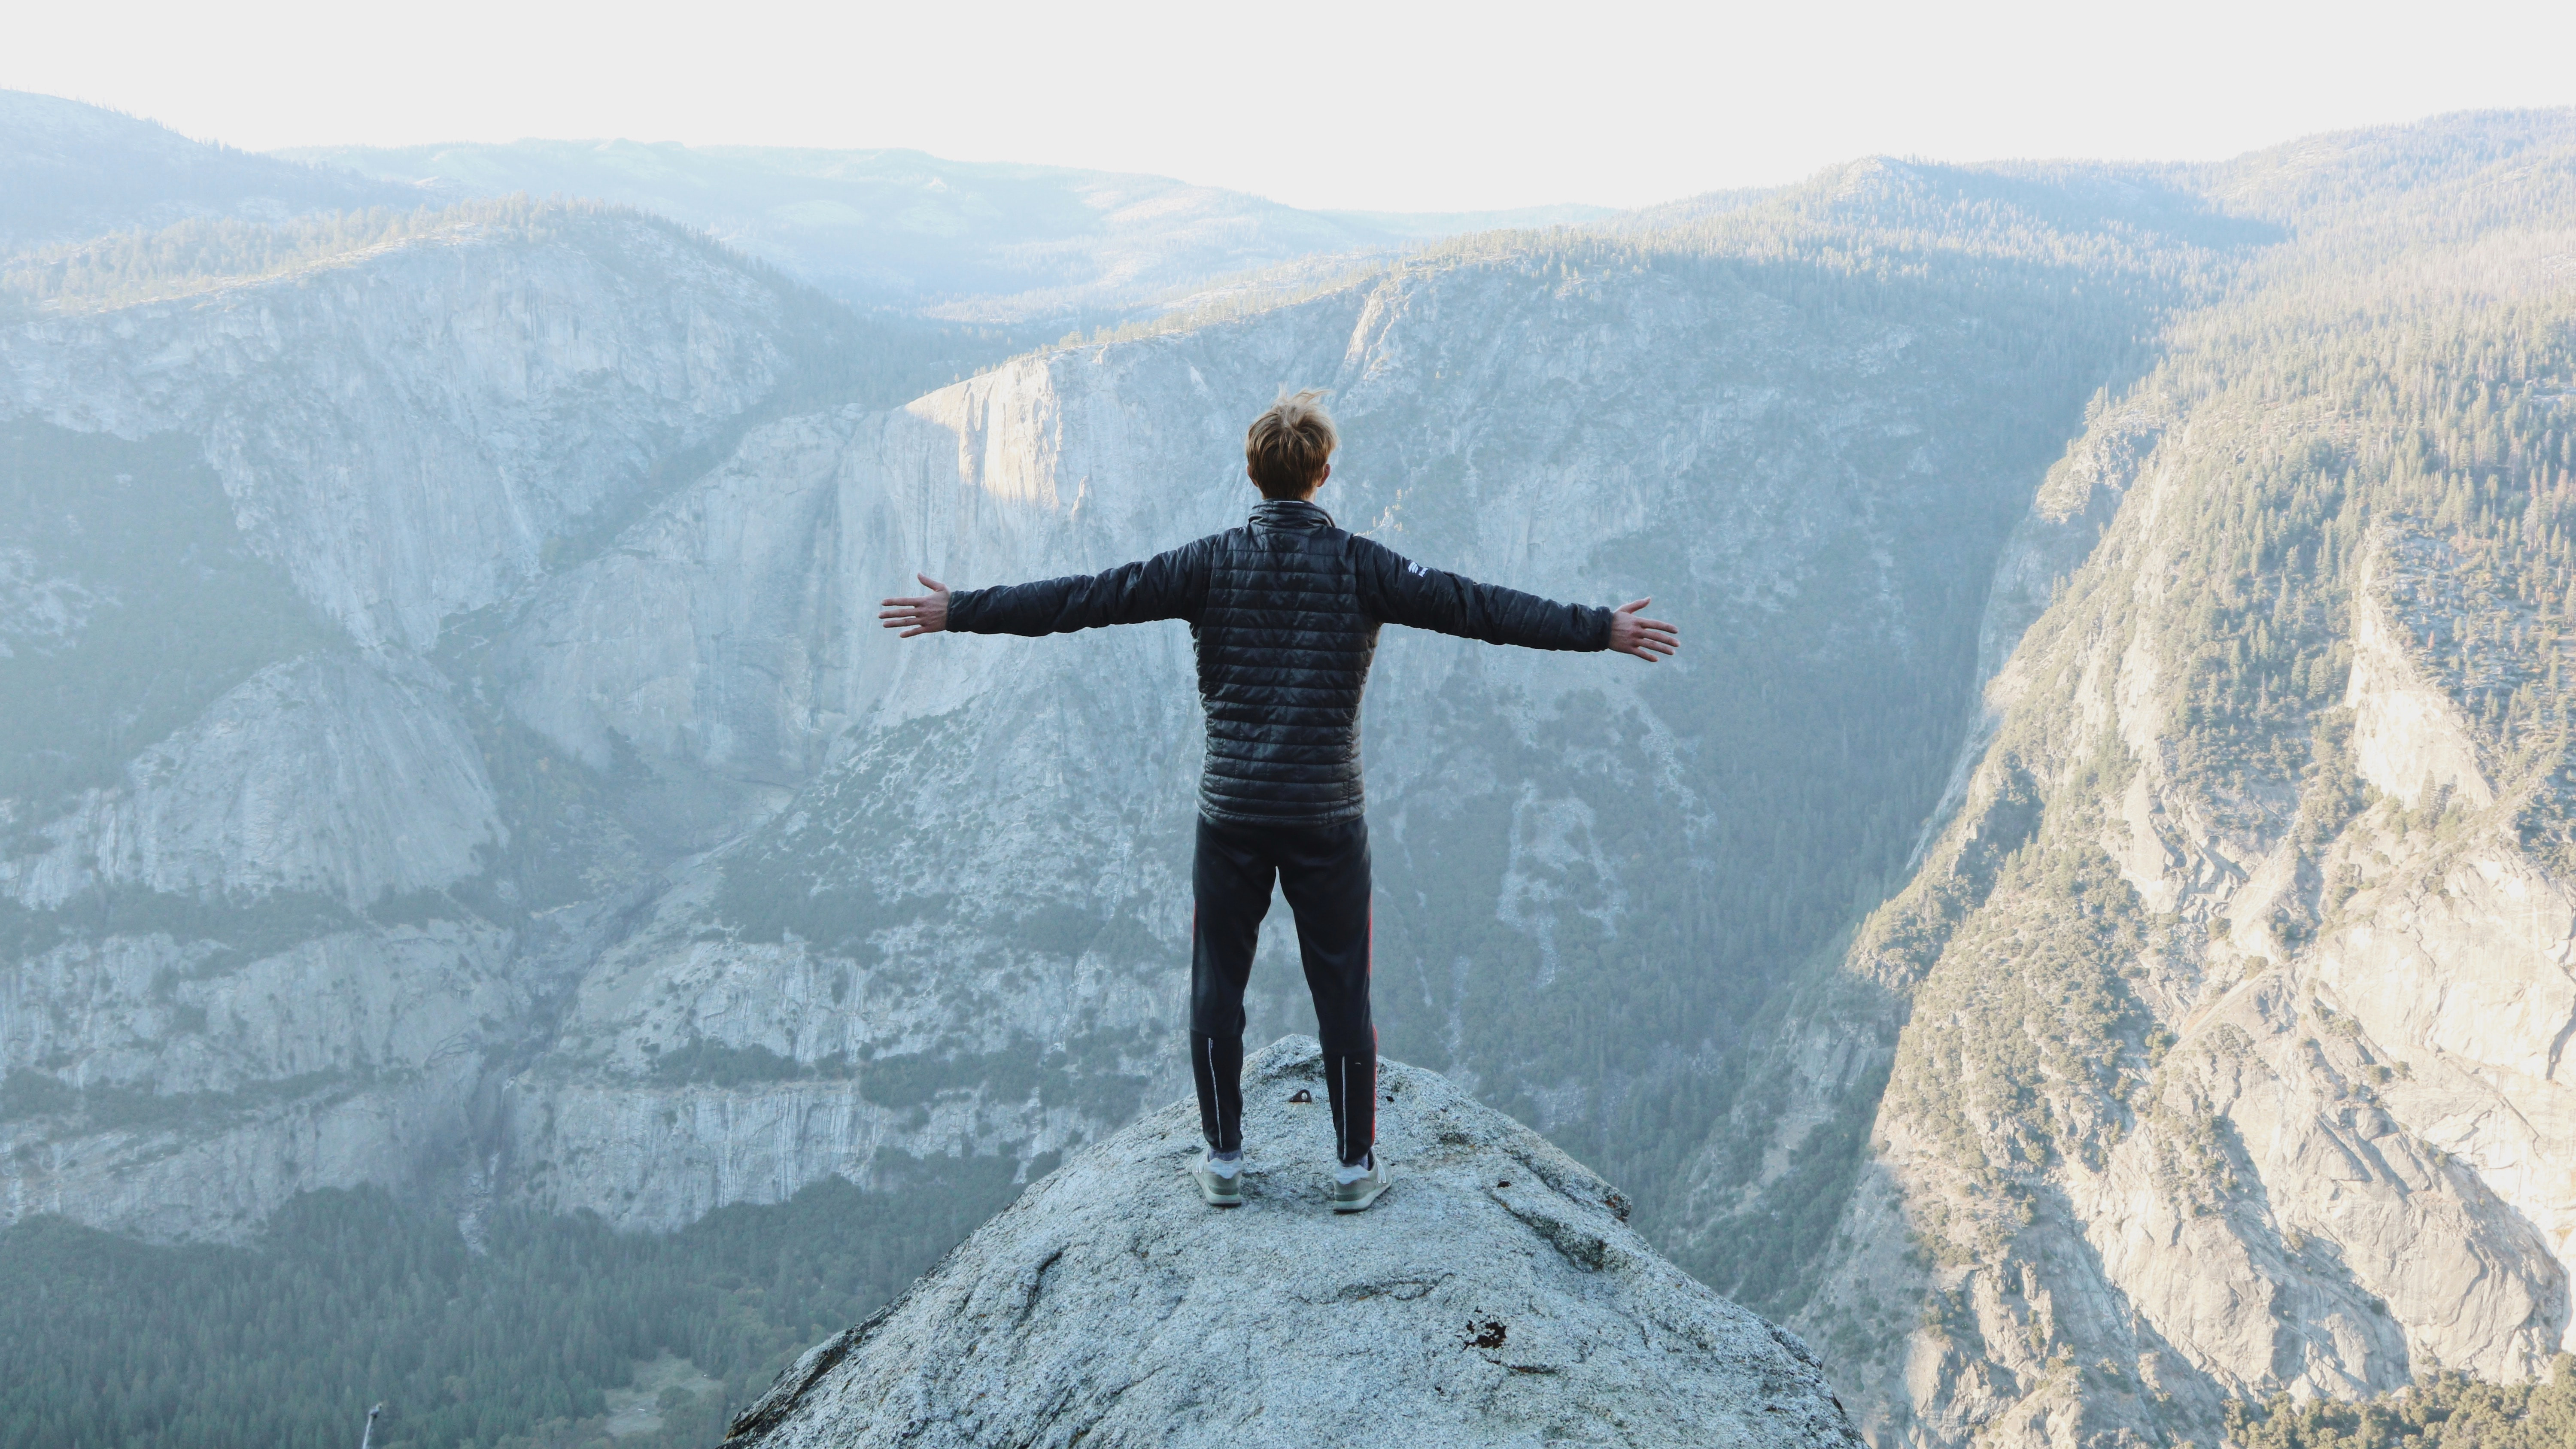 Person Spreading Arms and Breathing Fresh Air Above Yosemite Valley by Jason Hogan